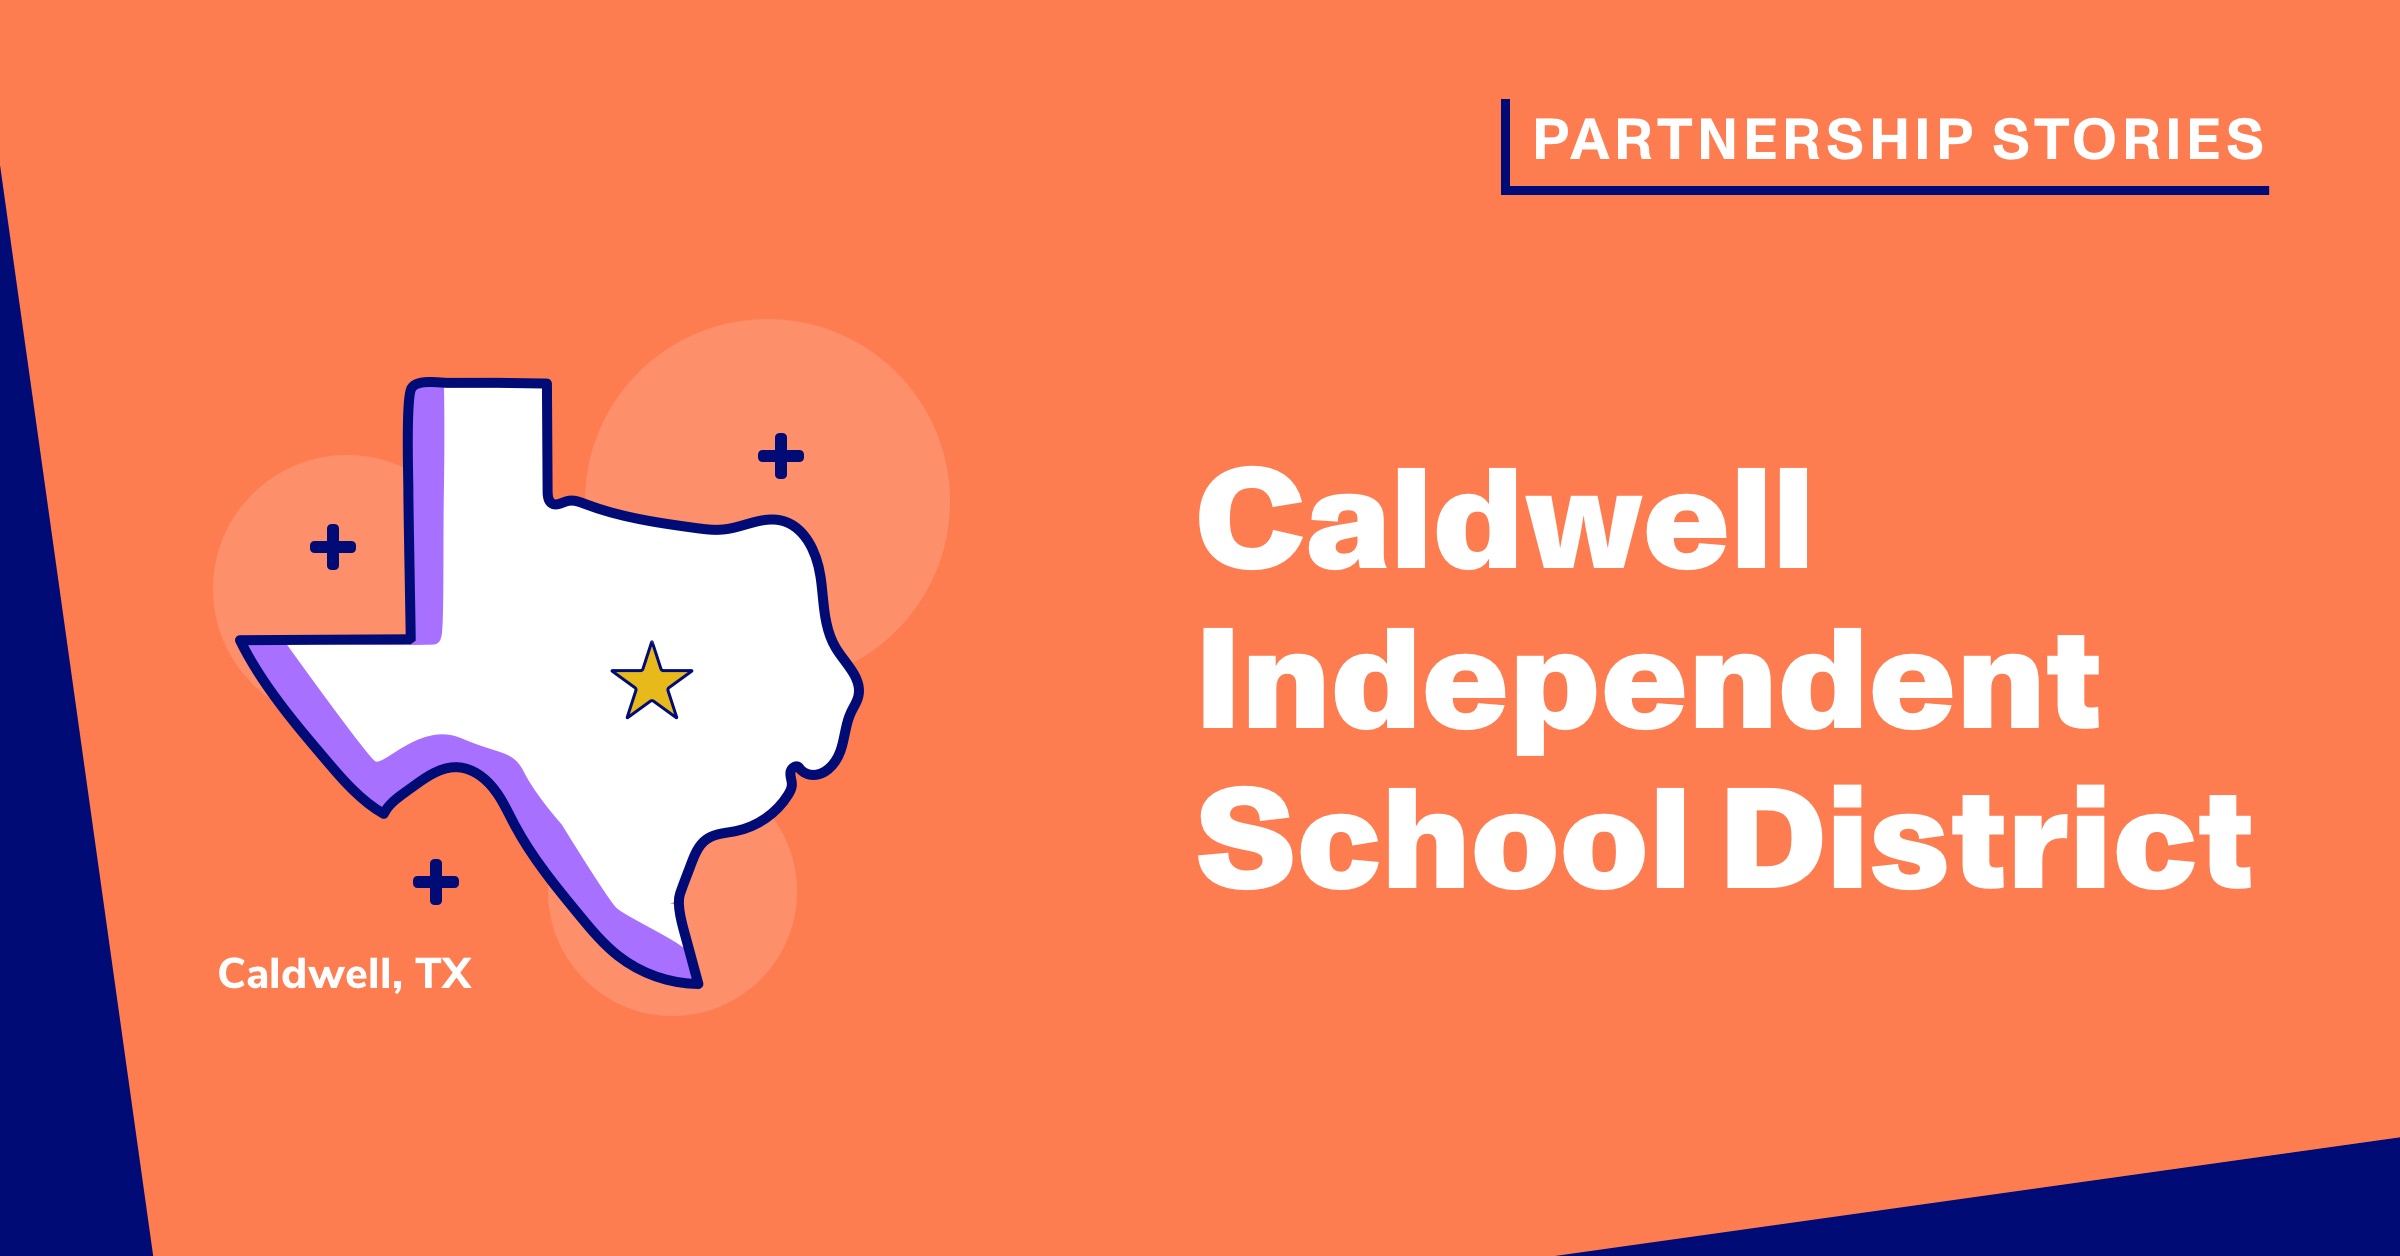 Caldwell Independent School District: Caldwell, Texas